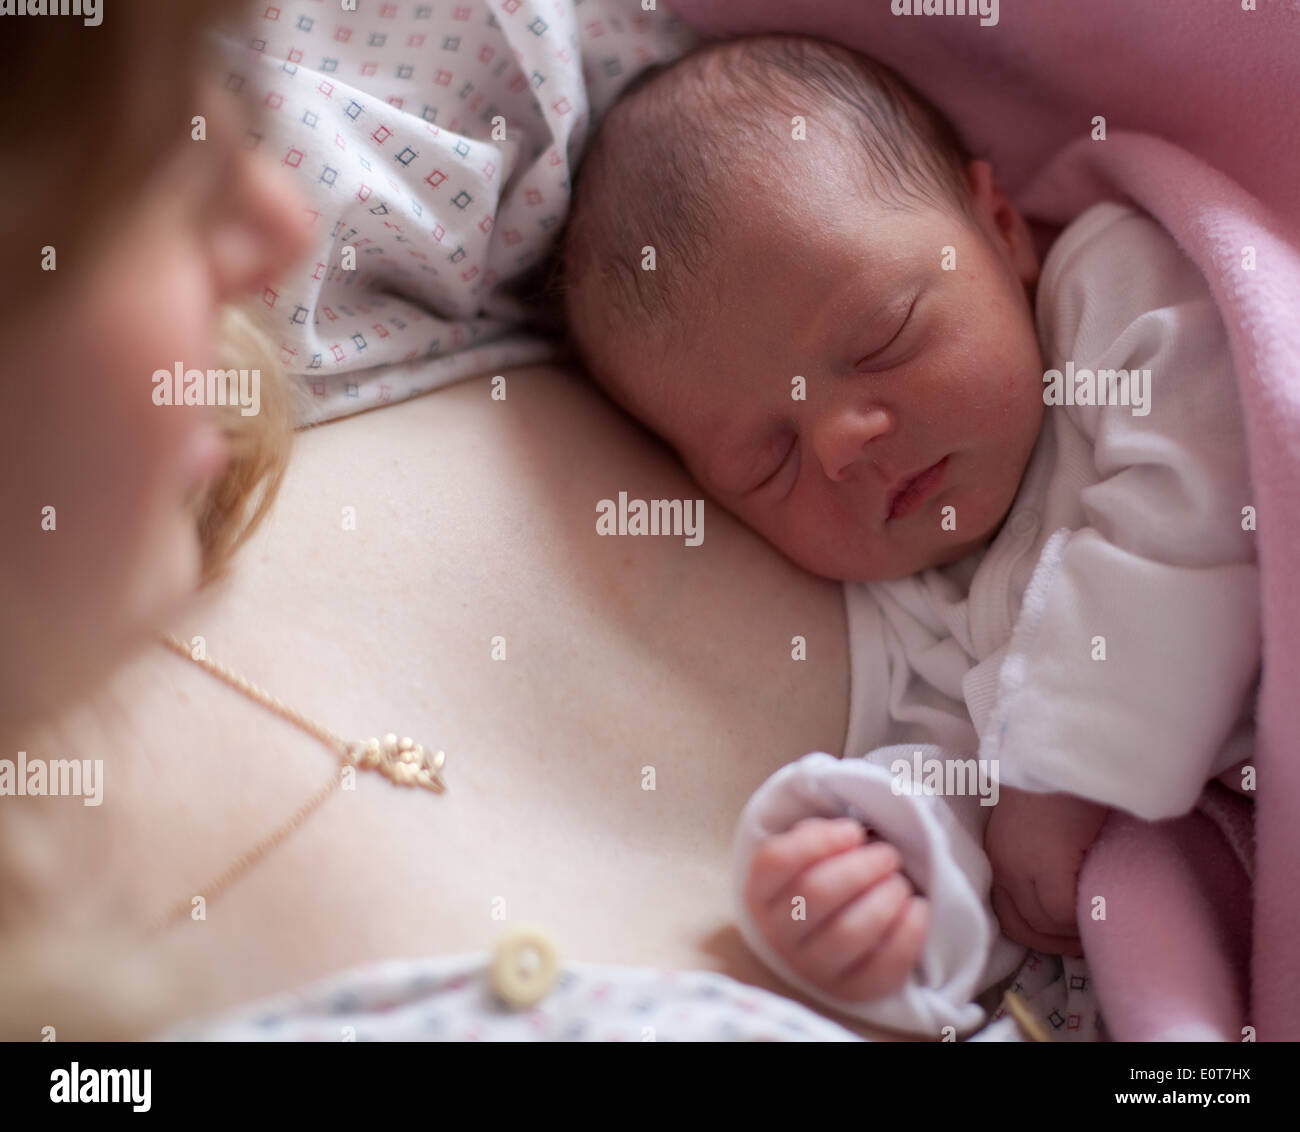 Mutter haelt ihr Baby im Arm - mother holds her baby in her arms Stock Photo